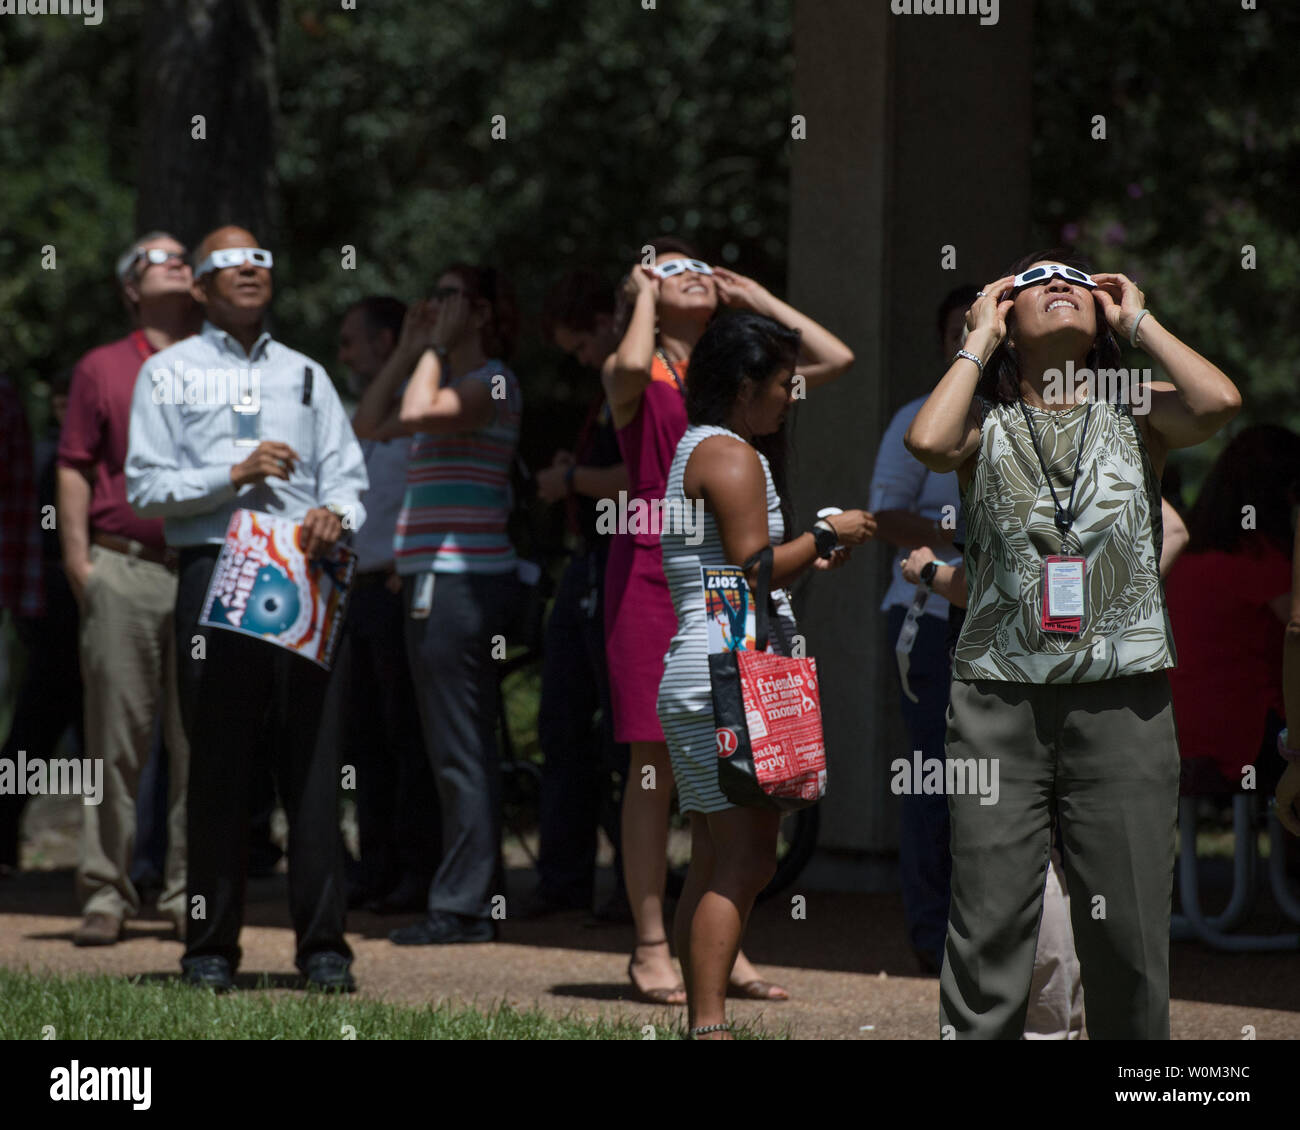 Employees at NASAÕs Johnson Space Center in Houston joined the rest of the country in experiencing the 2017 eclipse on August 21, 2017. Many used protective eclipse glasses, and others made use of manufactured or pin-hole cameras of opportunity to view the eclipse. In Houston, the partial eclipse duration was 2 hours, 59 minutes, reaching its maximum level of 67 percent at 1:17 p.m. CDT. Some members of the team supporting the International Space Station in the Christopher C. Kraft Mission Control Center took advantage of a break in their duties to step outside the windowless building to witne Stock Photo